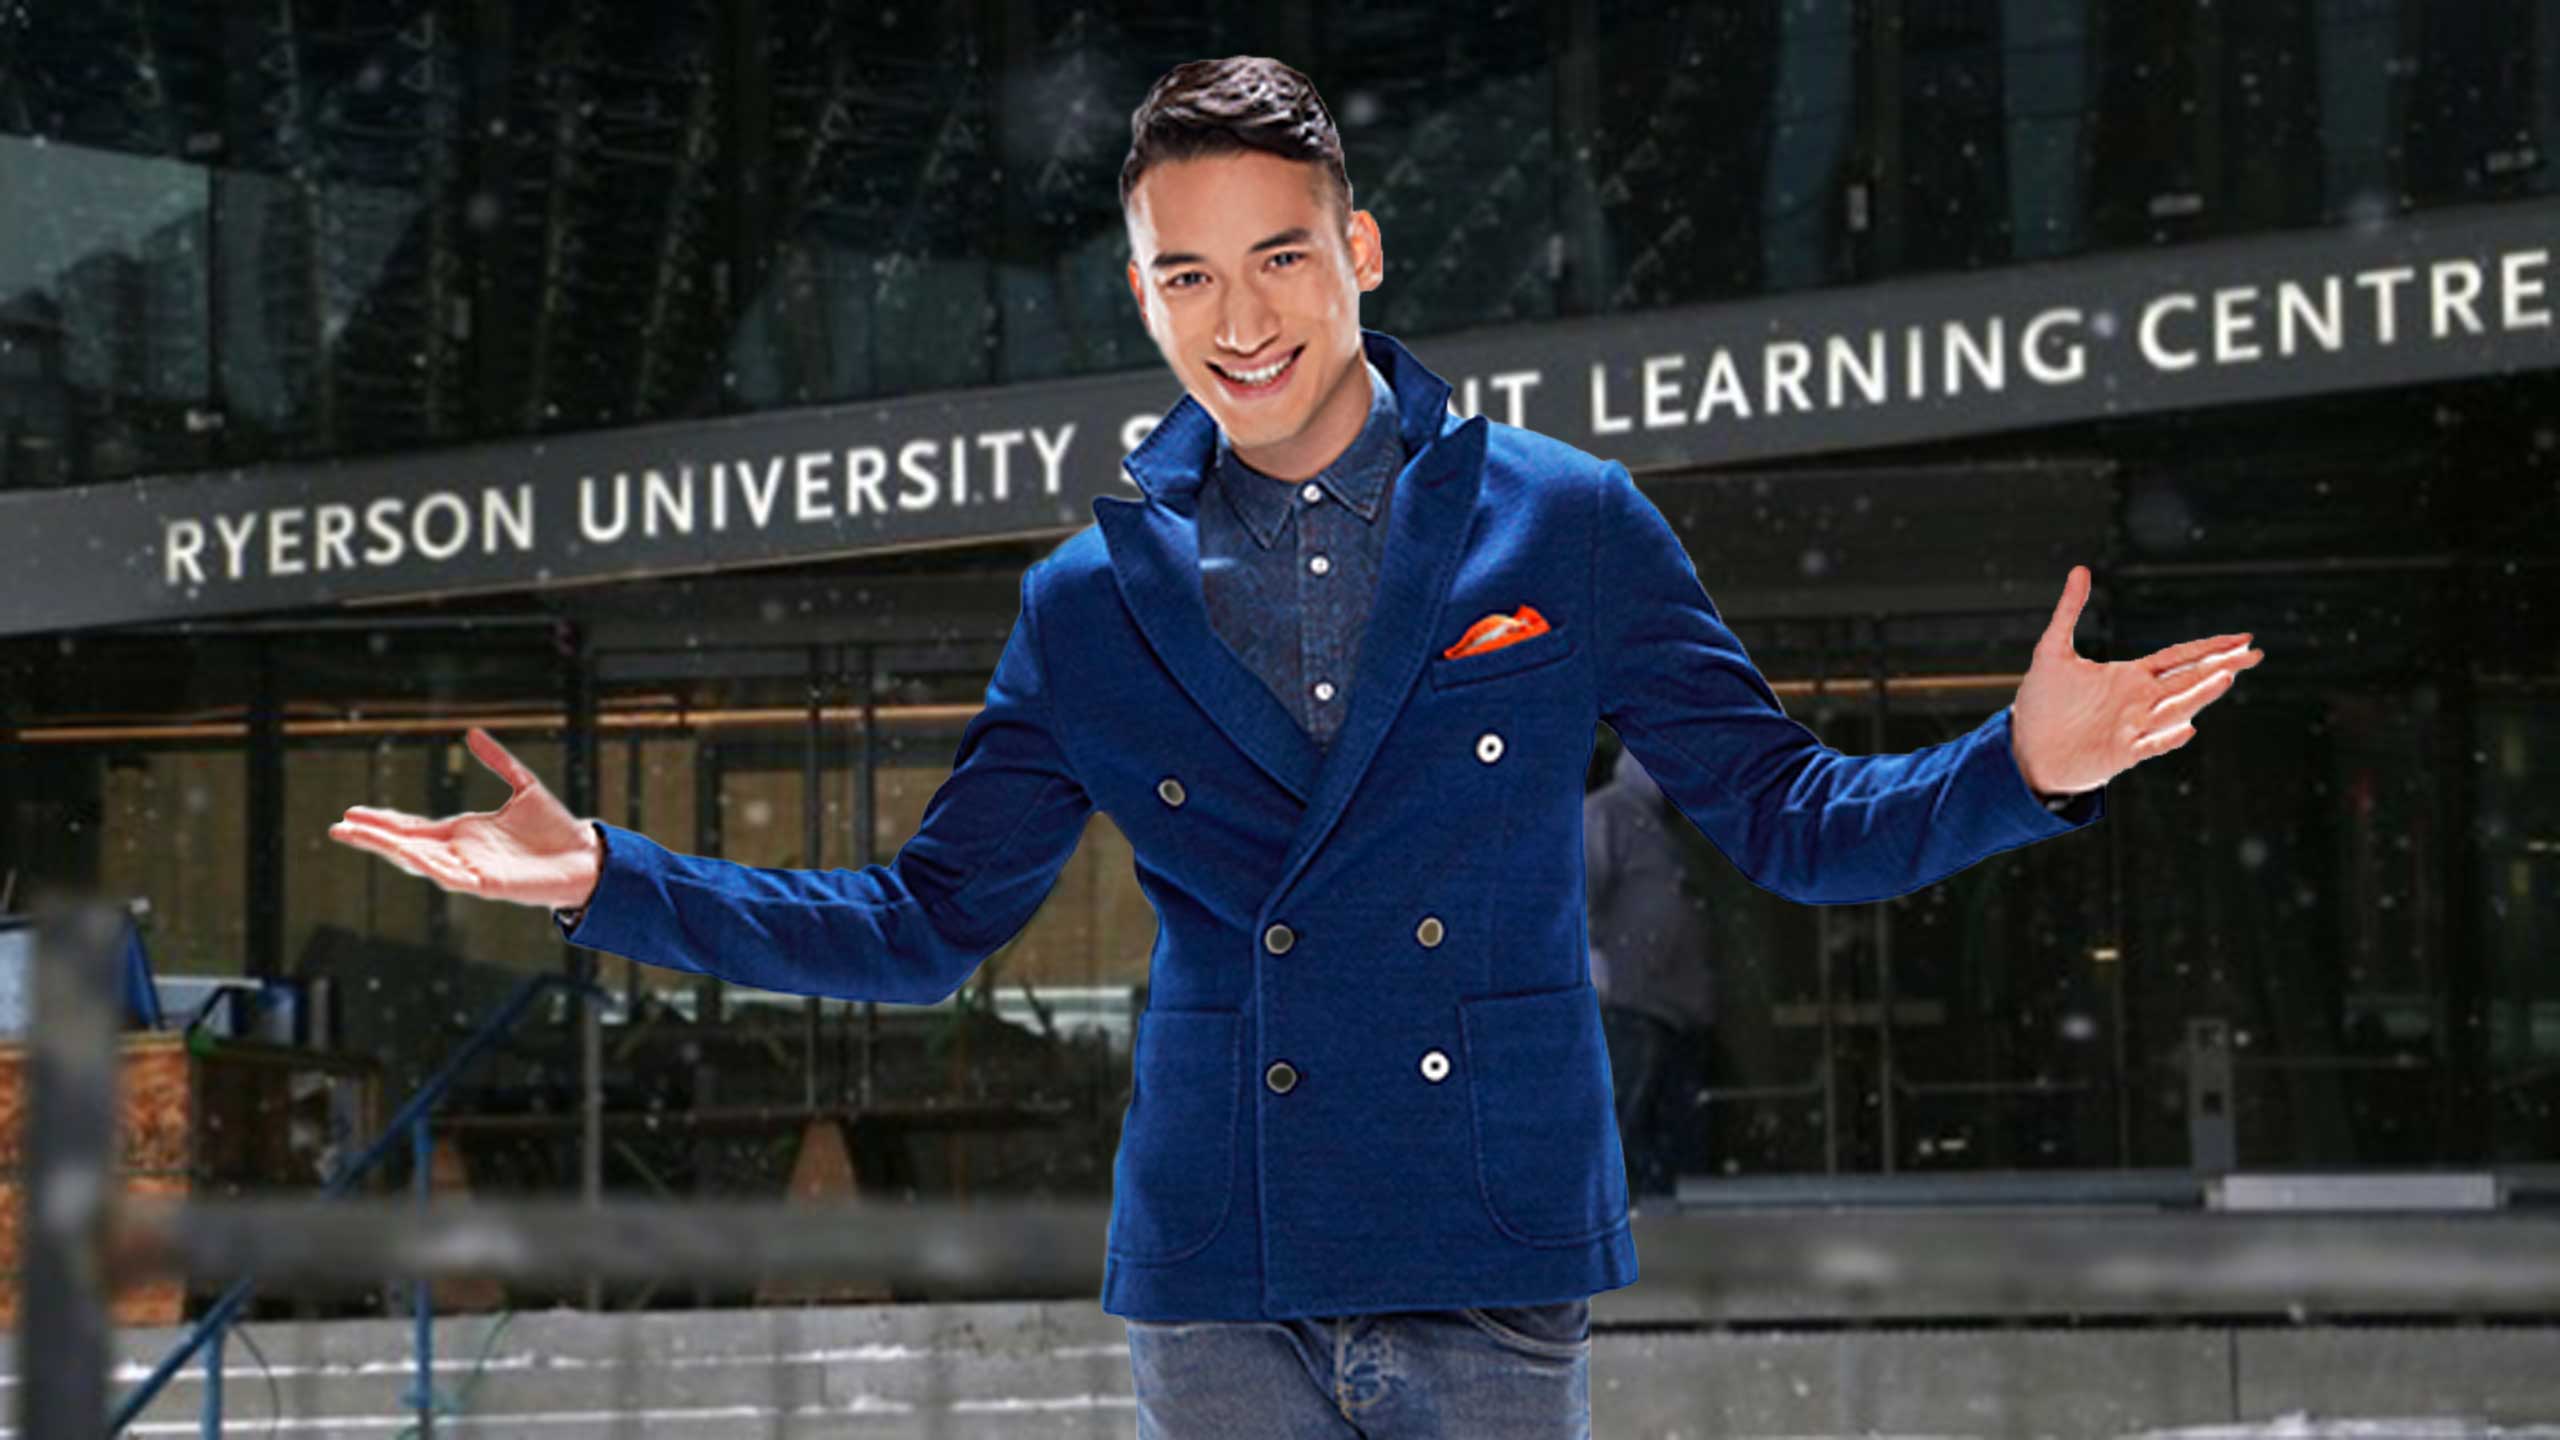 Carlos Bustamente (from YTV) stands in front of the Student Learning Centre